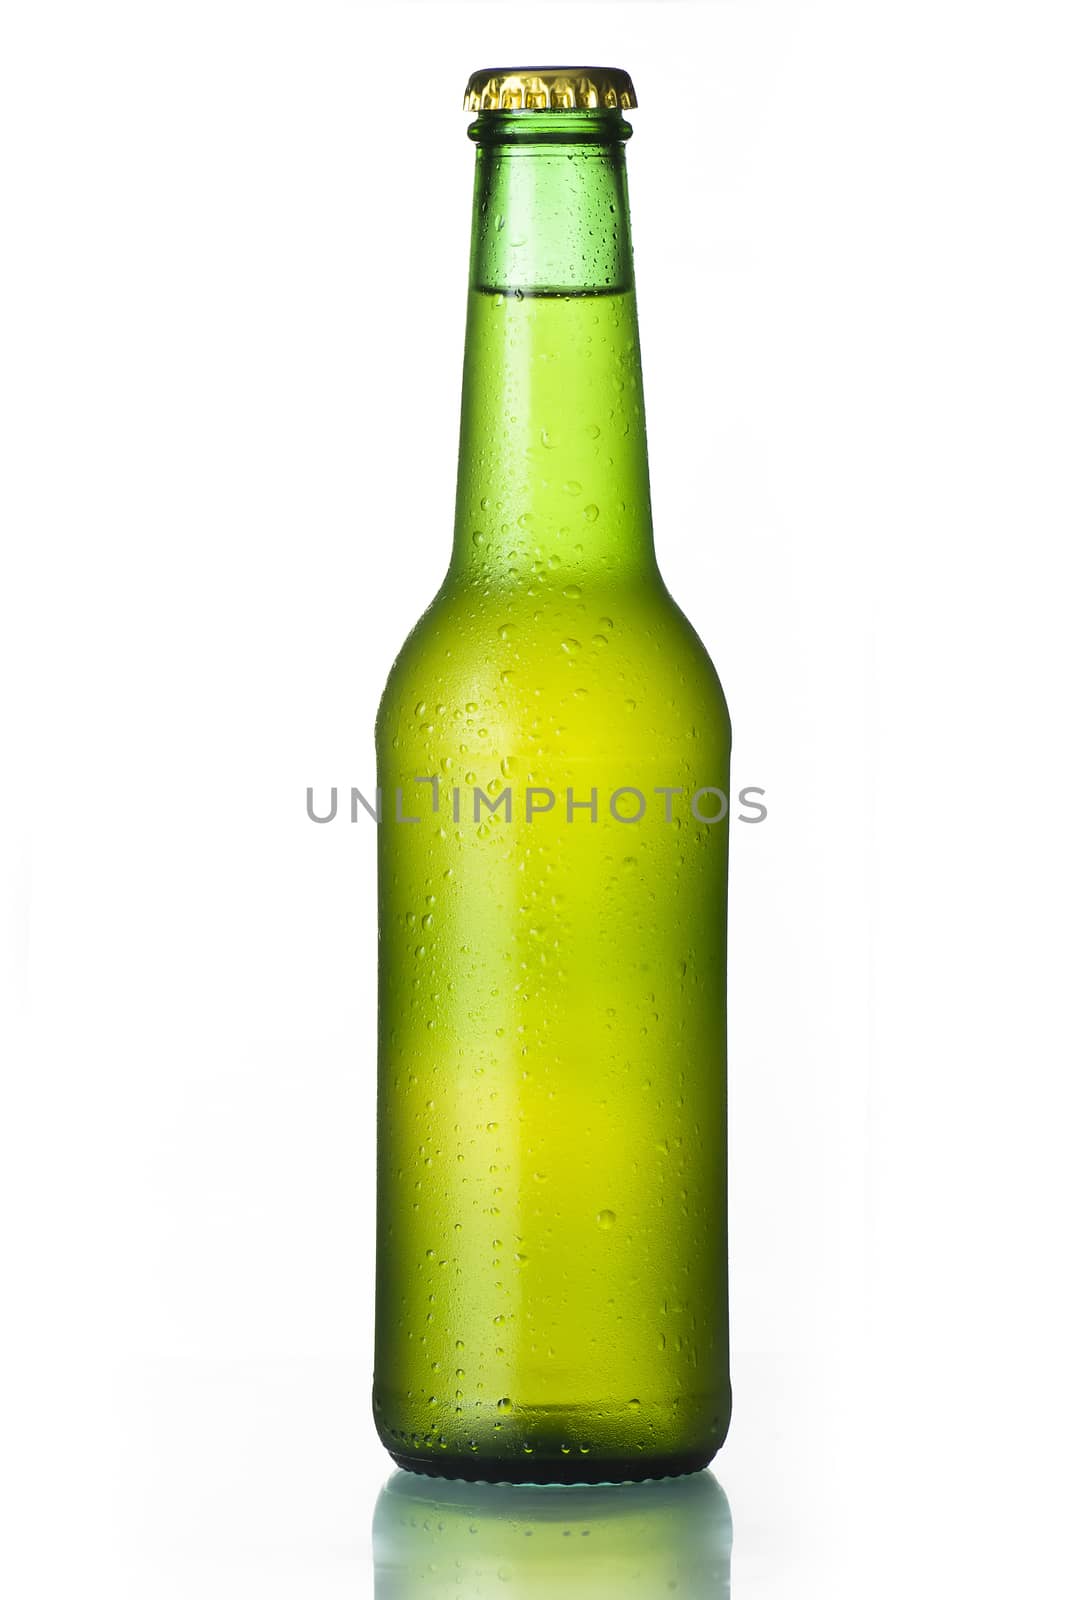 Cold frosted beer bottle on white background.